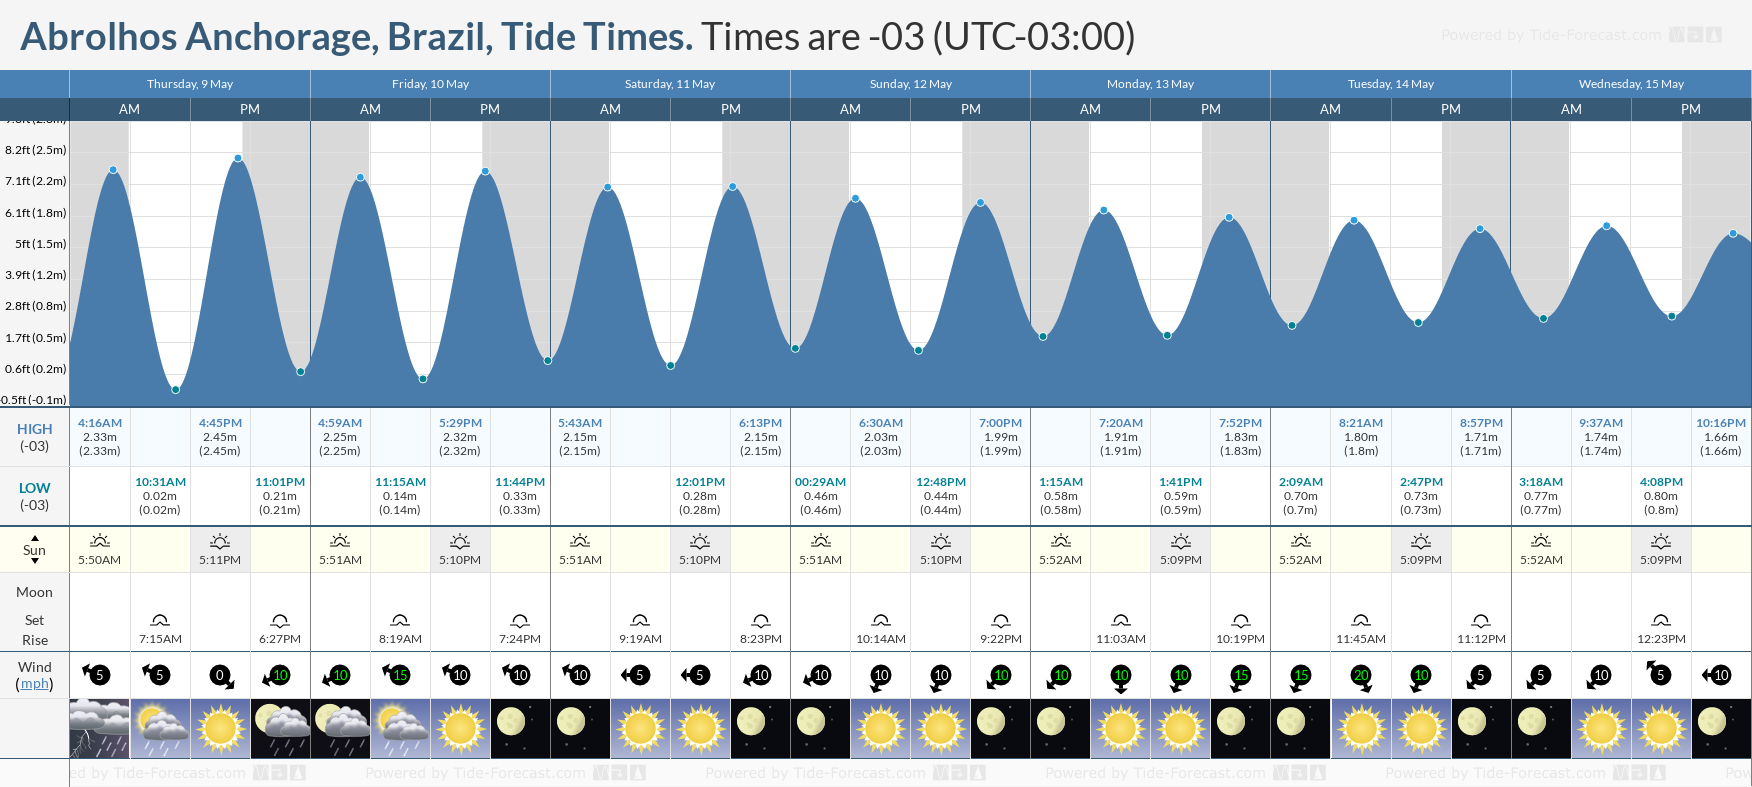 Abrolhos Anchorage, Brazil Tide Chart including high and low tide times for the next 7 days